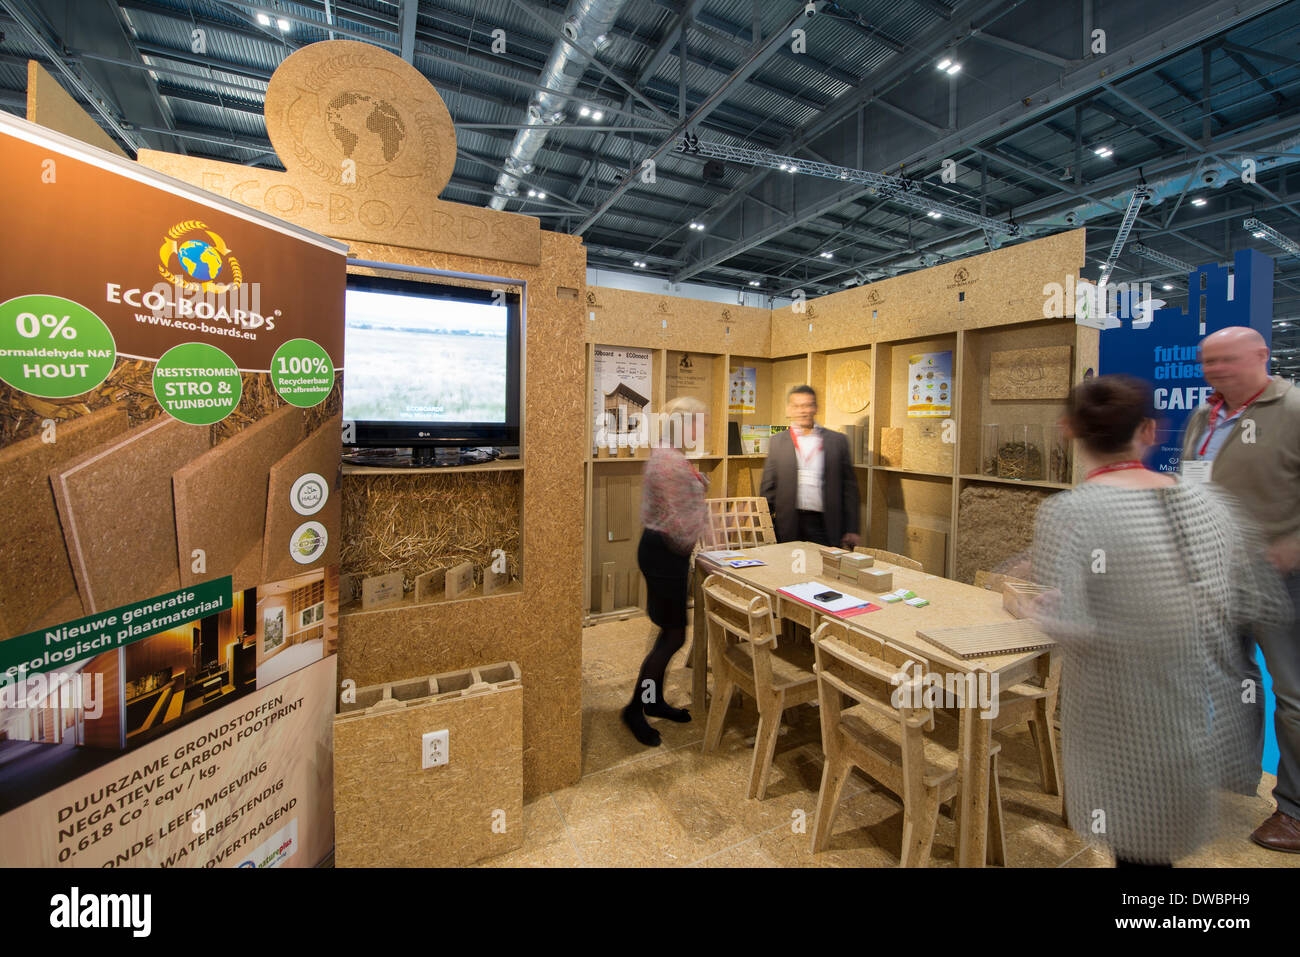 Eco Board sustainable materials stand at the Ecobuild trade exhibition in  Excel, London. Credit: Malcolm Park editorial/Alamy Live News Stock Photo -  Alamy